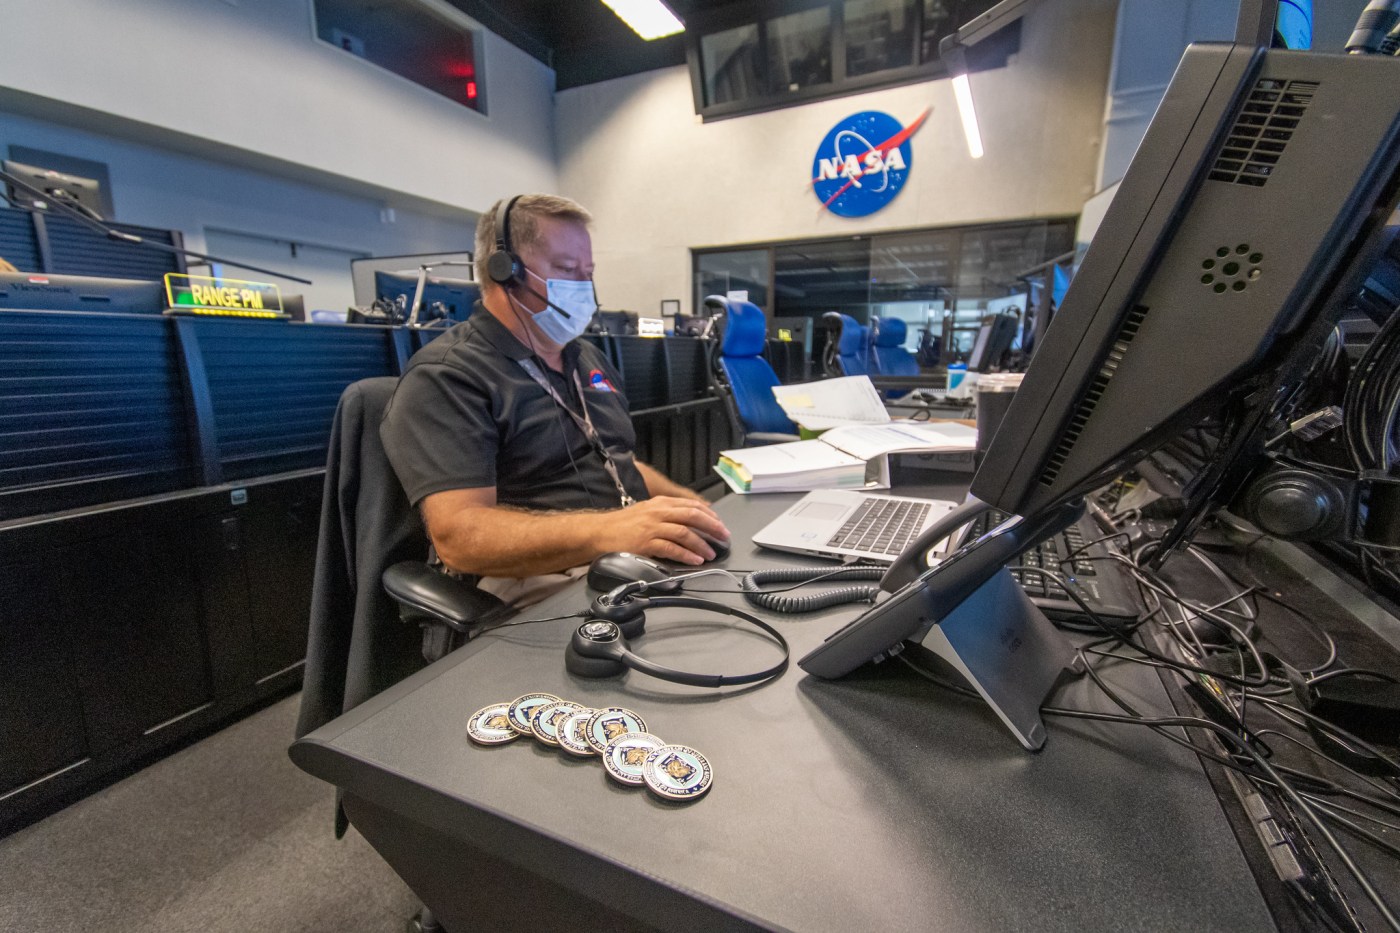 Greg Cusimano works at computer inside NASA’s Range Control Center to help resupply the International Space Station